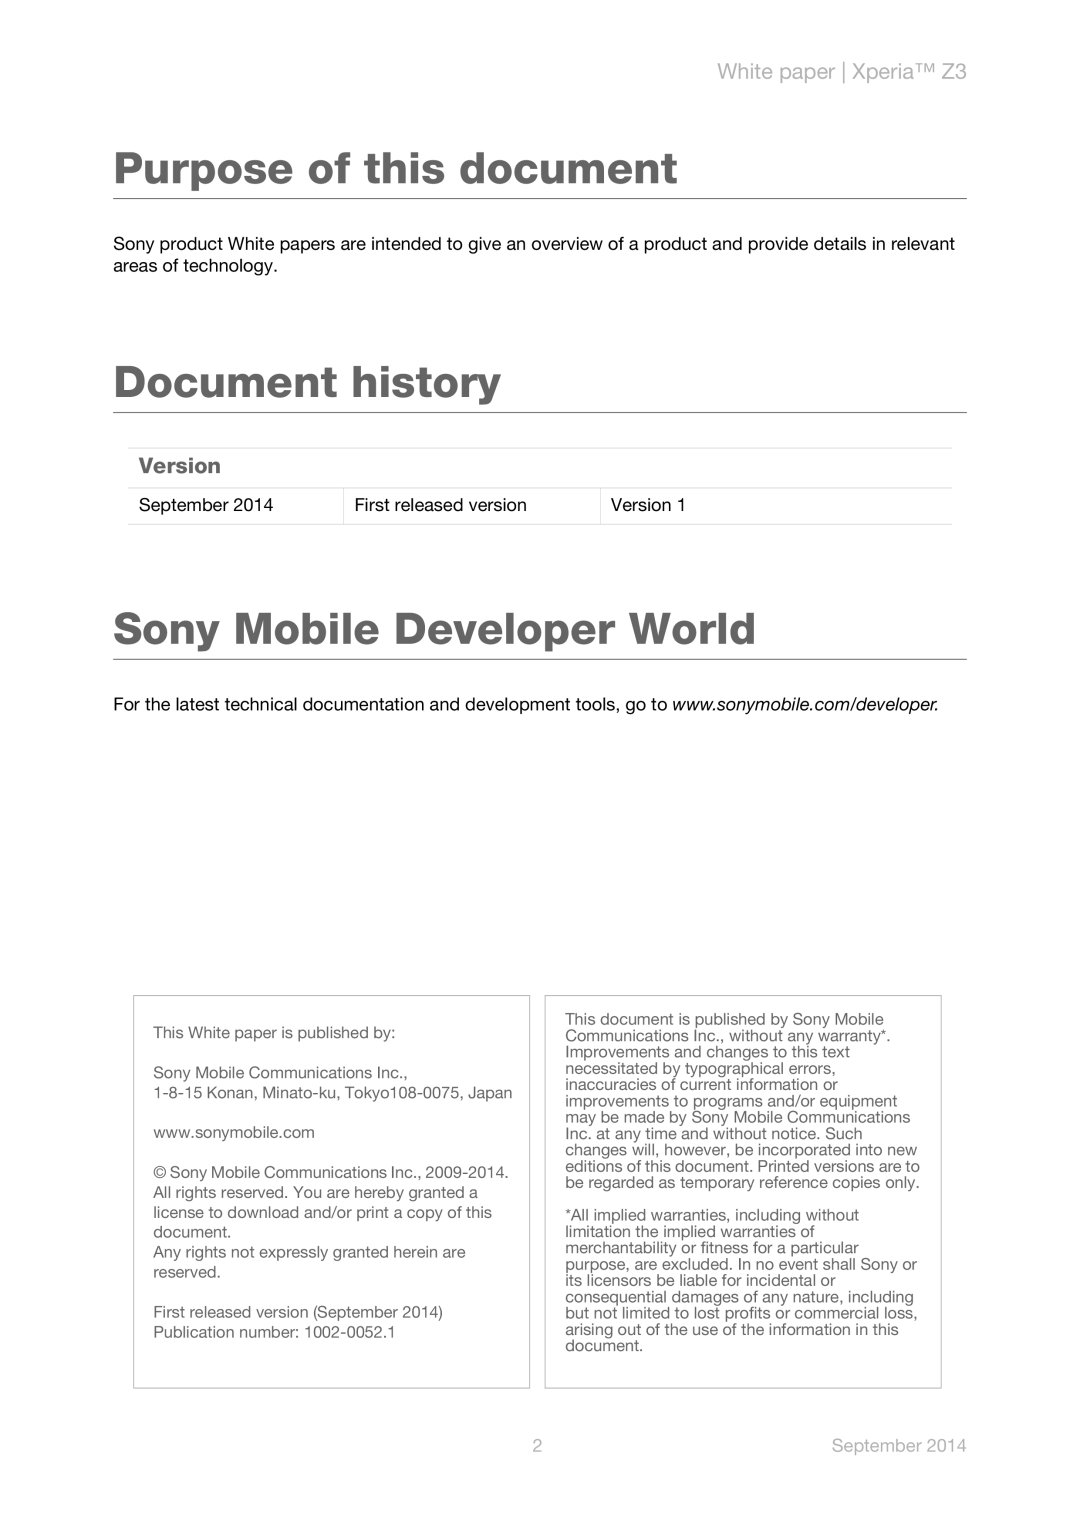 Sony D6616, D6653, D6633, D6603, D6643 White paper Xperia Z3, Version, September, Purpose of this document, Document history 